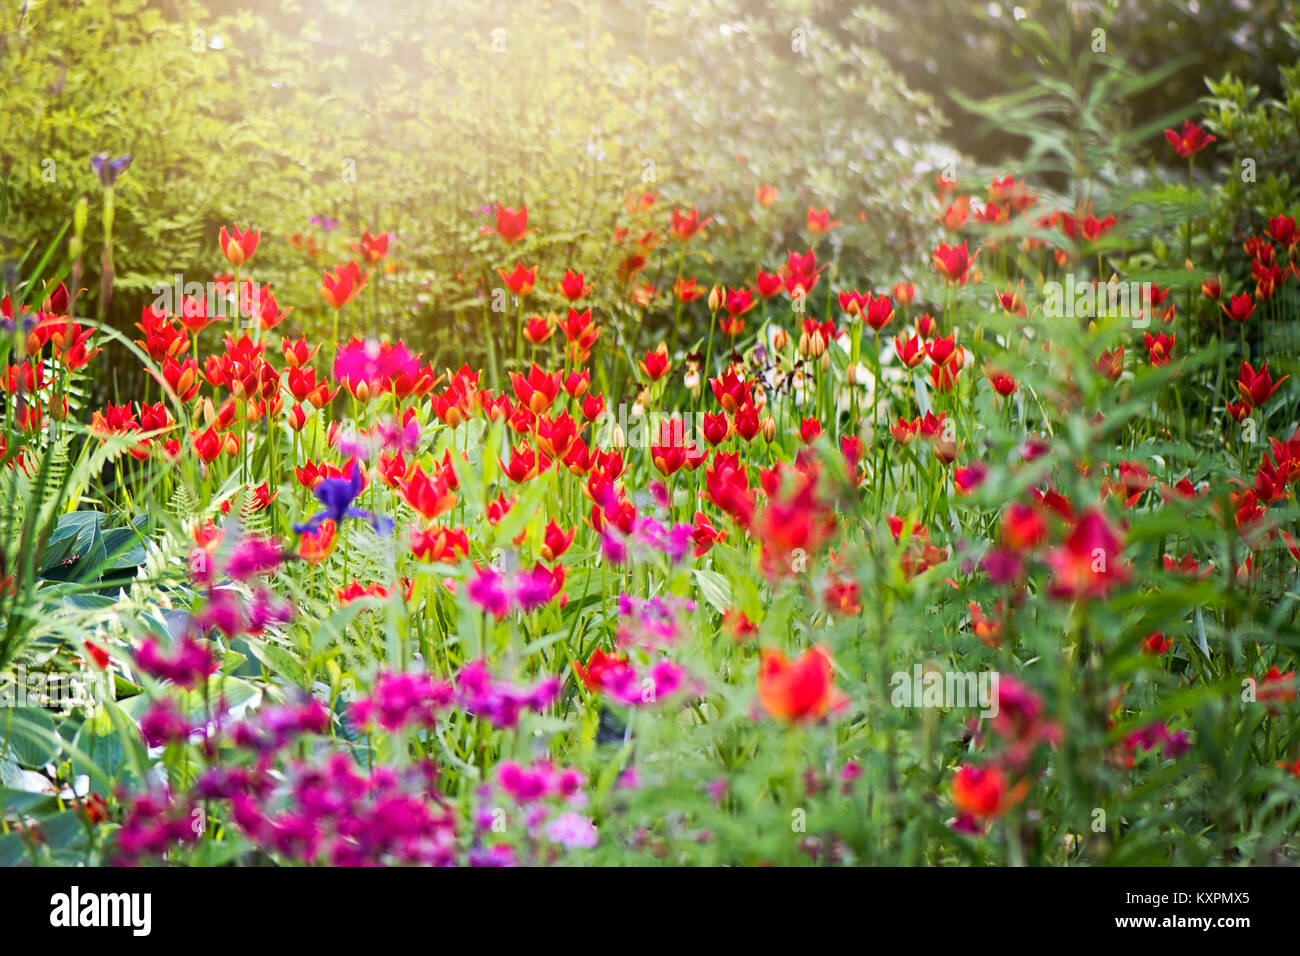 A sunny herbaceous border with vibrant red Tulipa sprengeri flowers Stock Photo